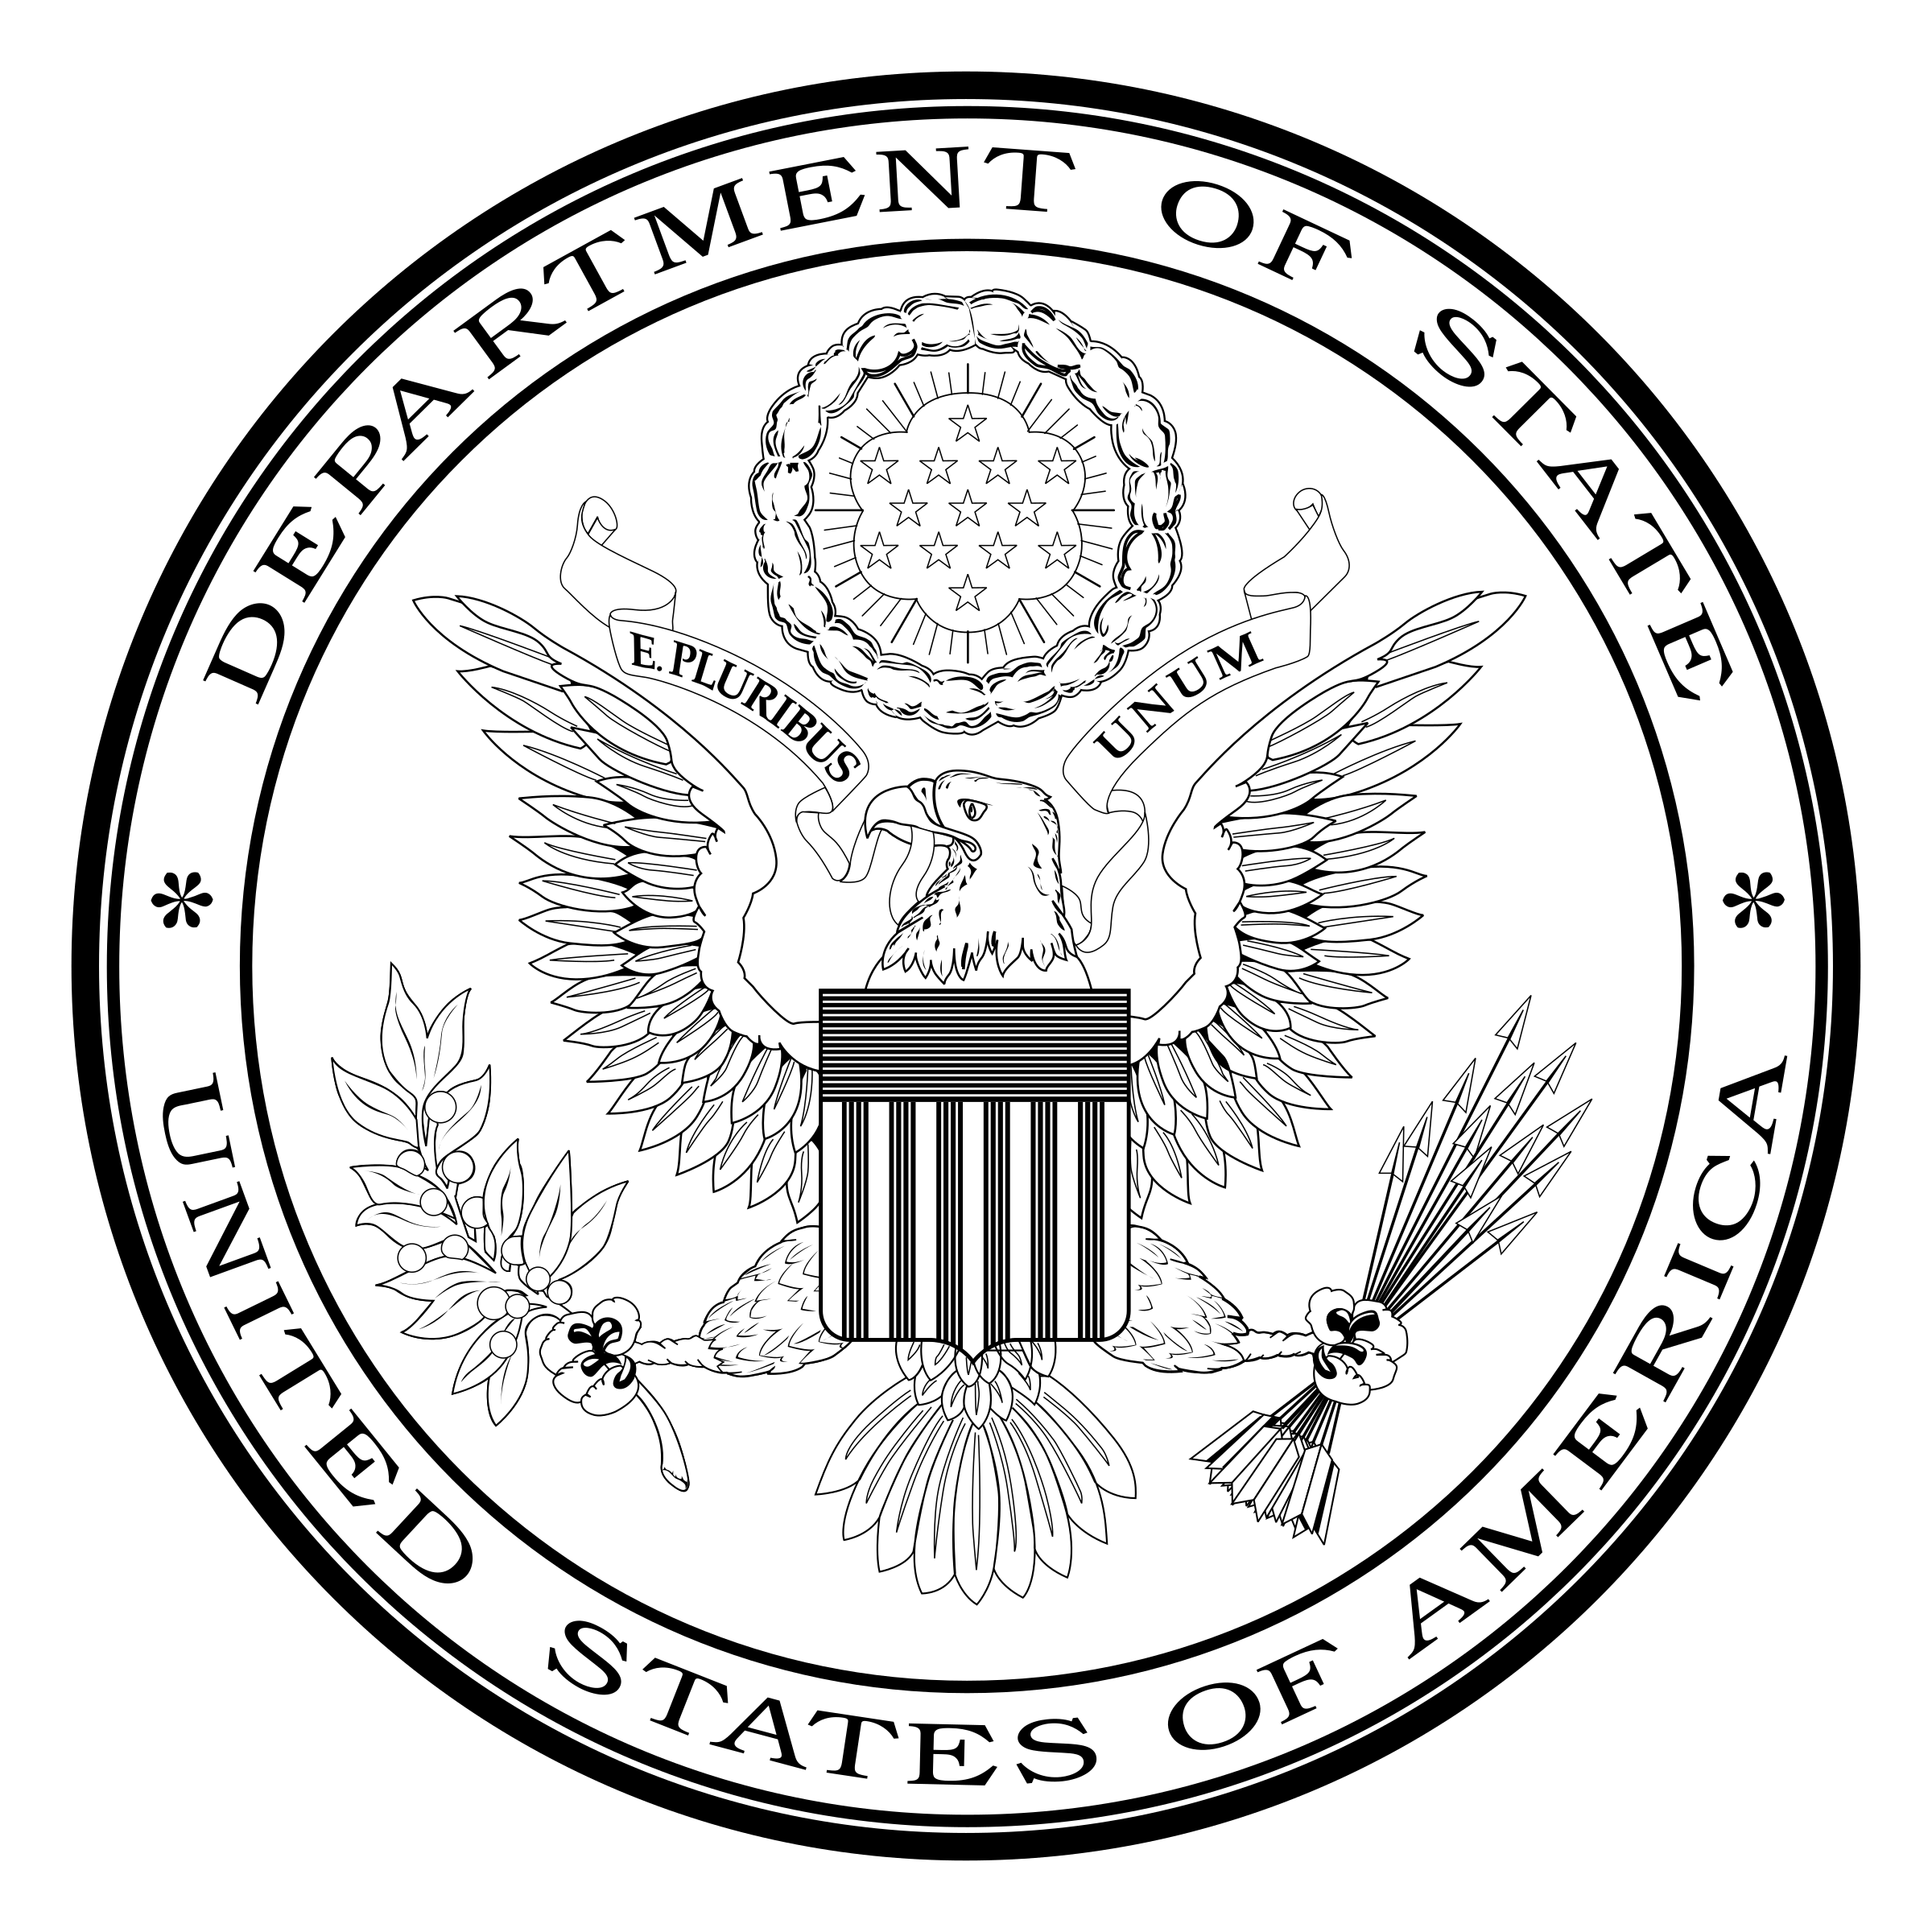 Department of State Logo - US Department of State Logo PNG Transparent & SVG Vector - Freebie ...